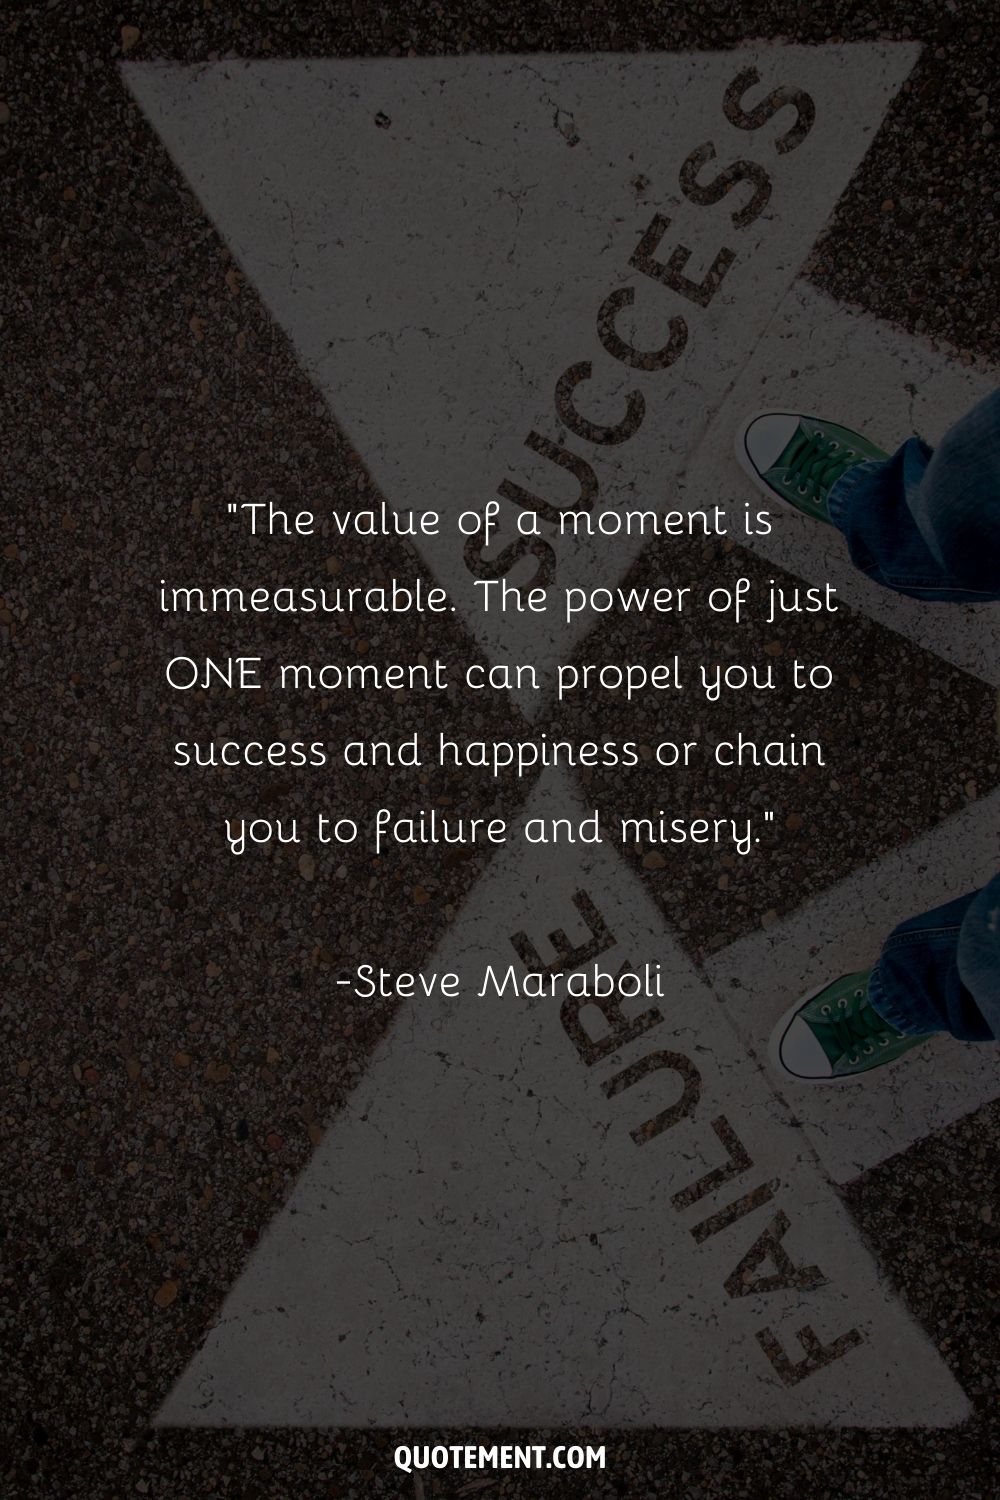 “The value of a moment is immeasurable. The power of just ONE moment can propel you to success and happiness or chain you to failure and misery.”